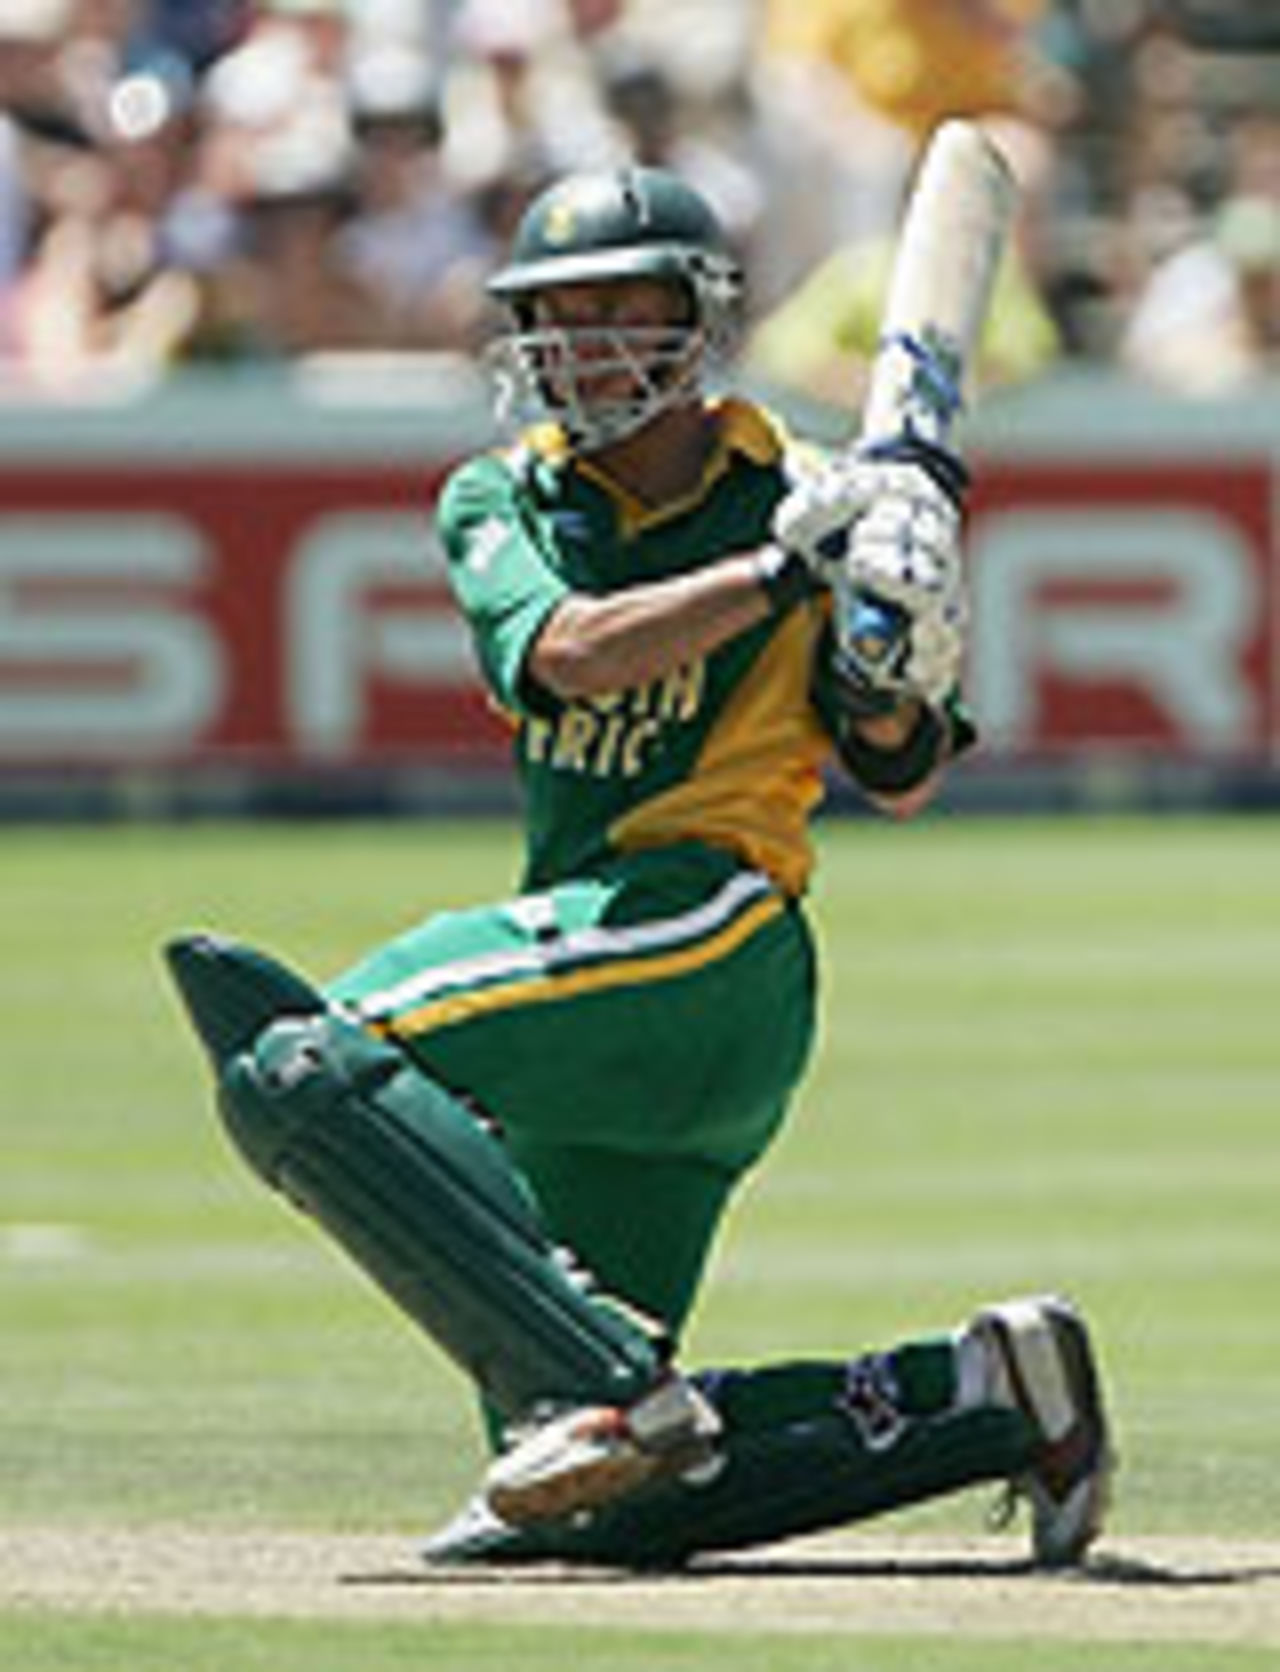 Herschelle Gibbs sweeps en route to his 14th ODI century at Newlands, South Africa v England, Port Elizabeth, February 4, 2005